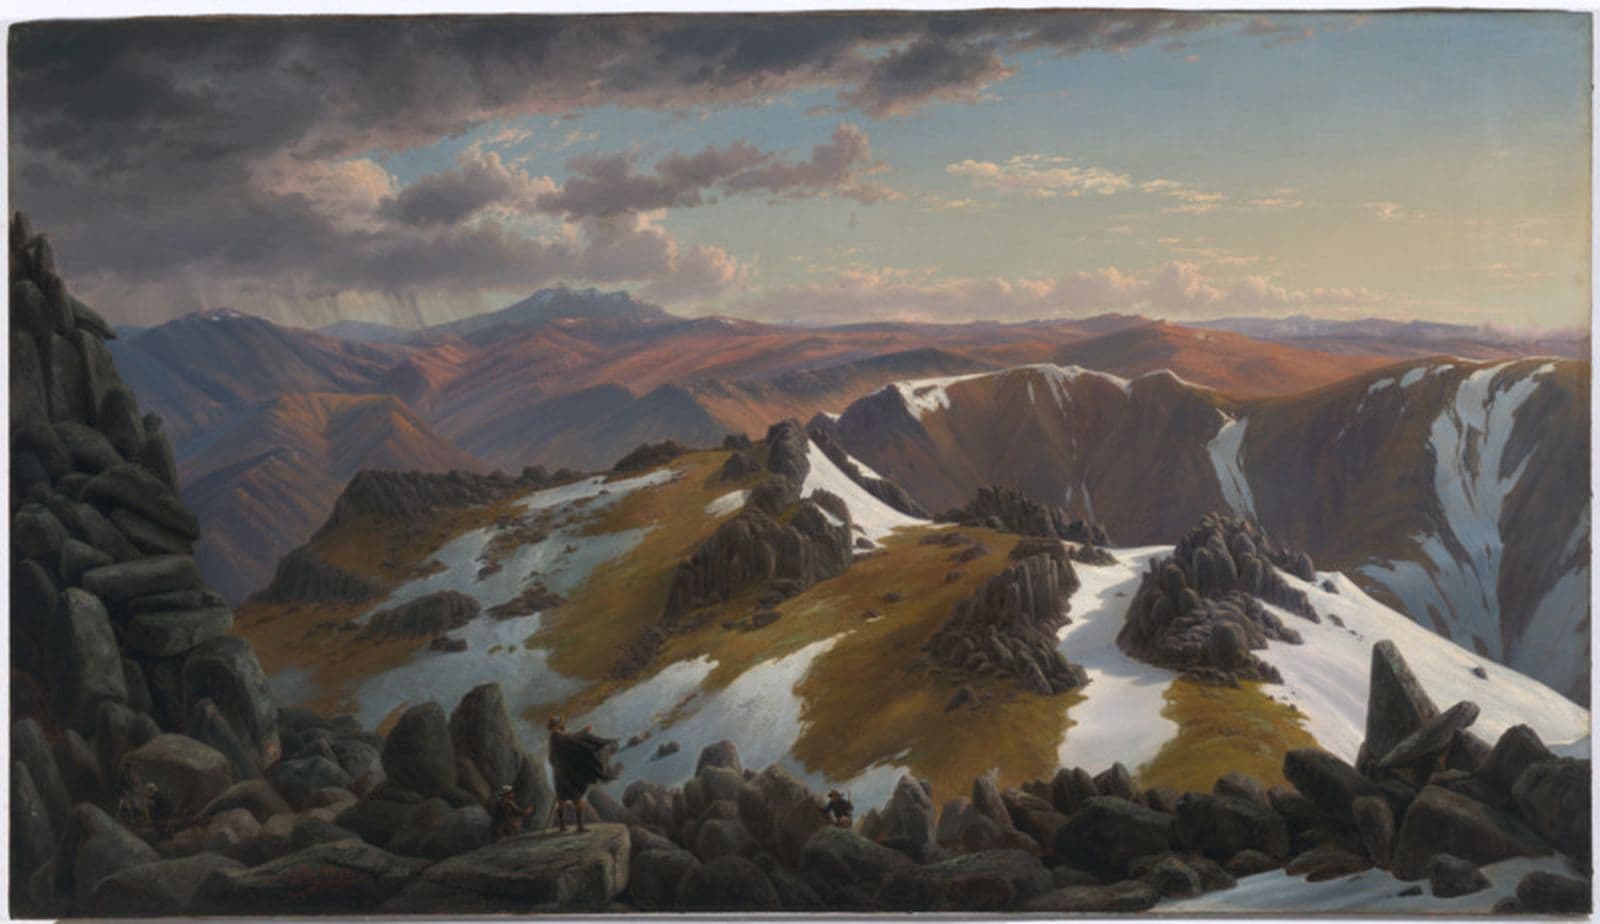 A painting of the view from Mount Townsend looking towards Mount Jagungal